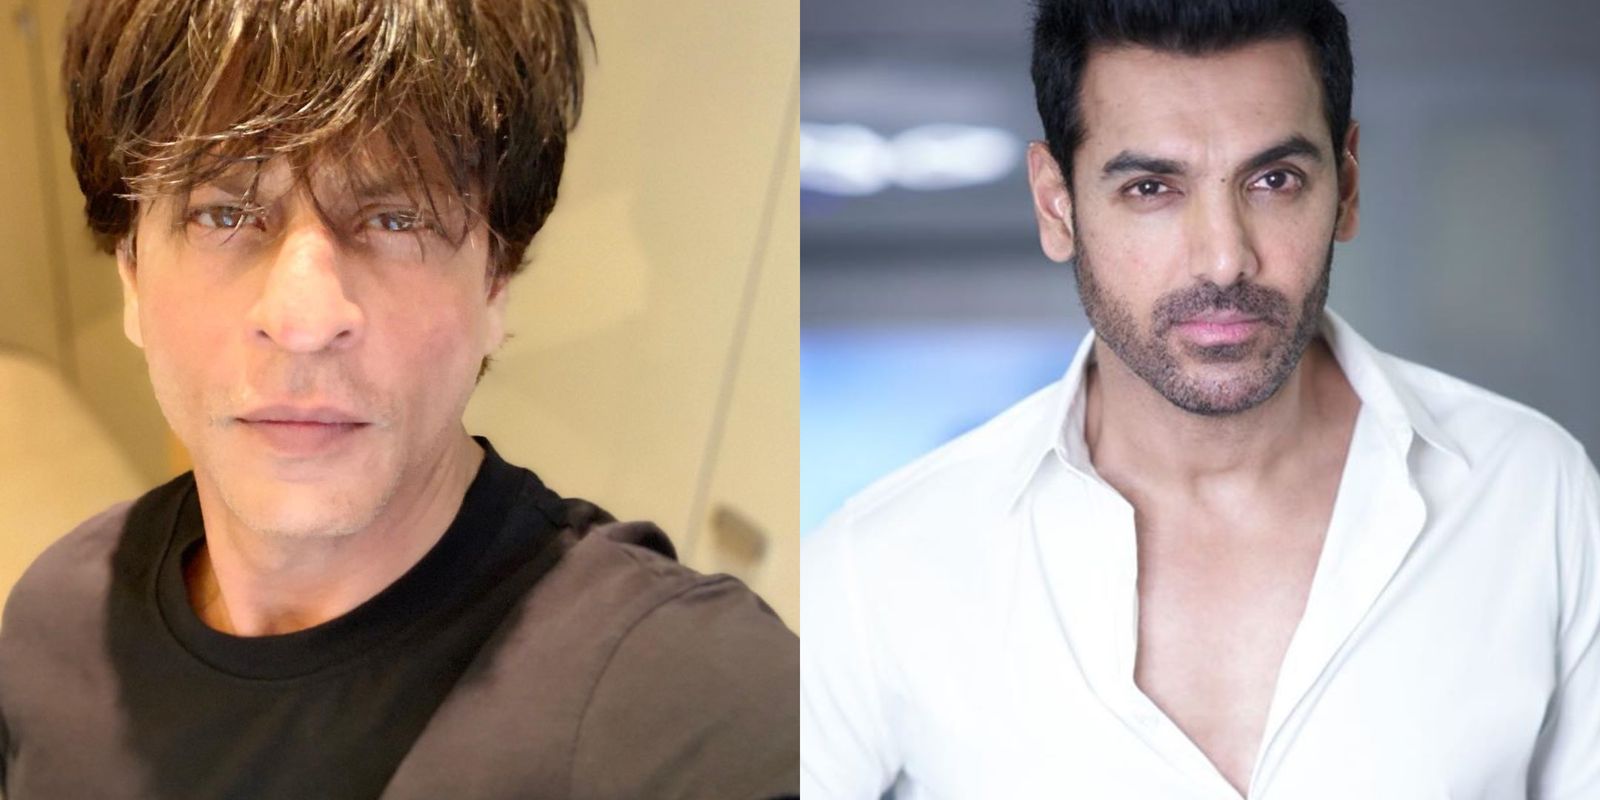 Shah Rukh Khan And John Abraham To Have Face Off In YRF's Pathan? Know Details